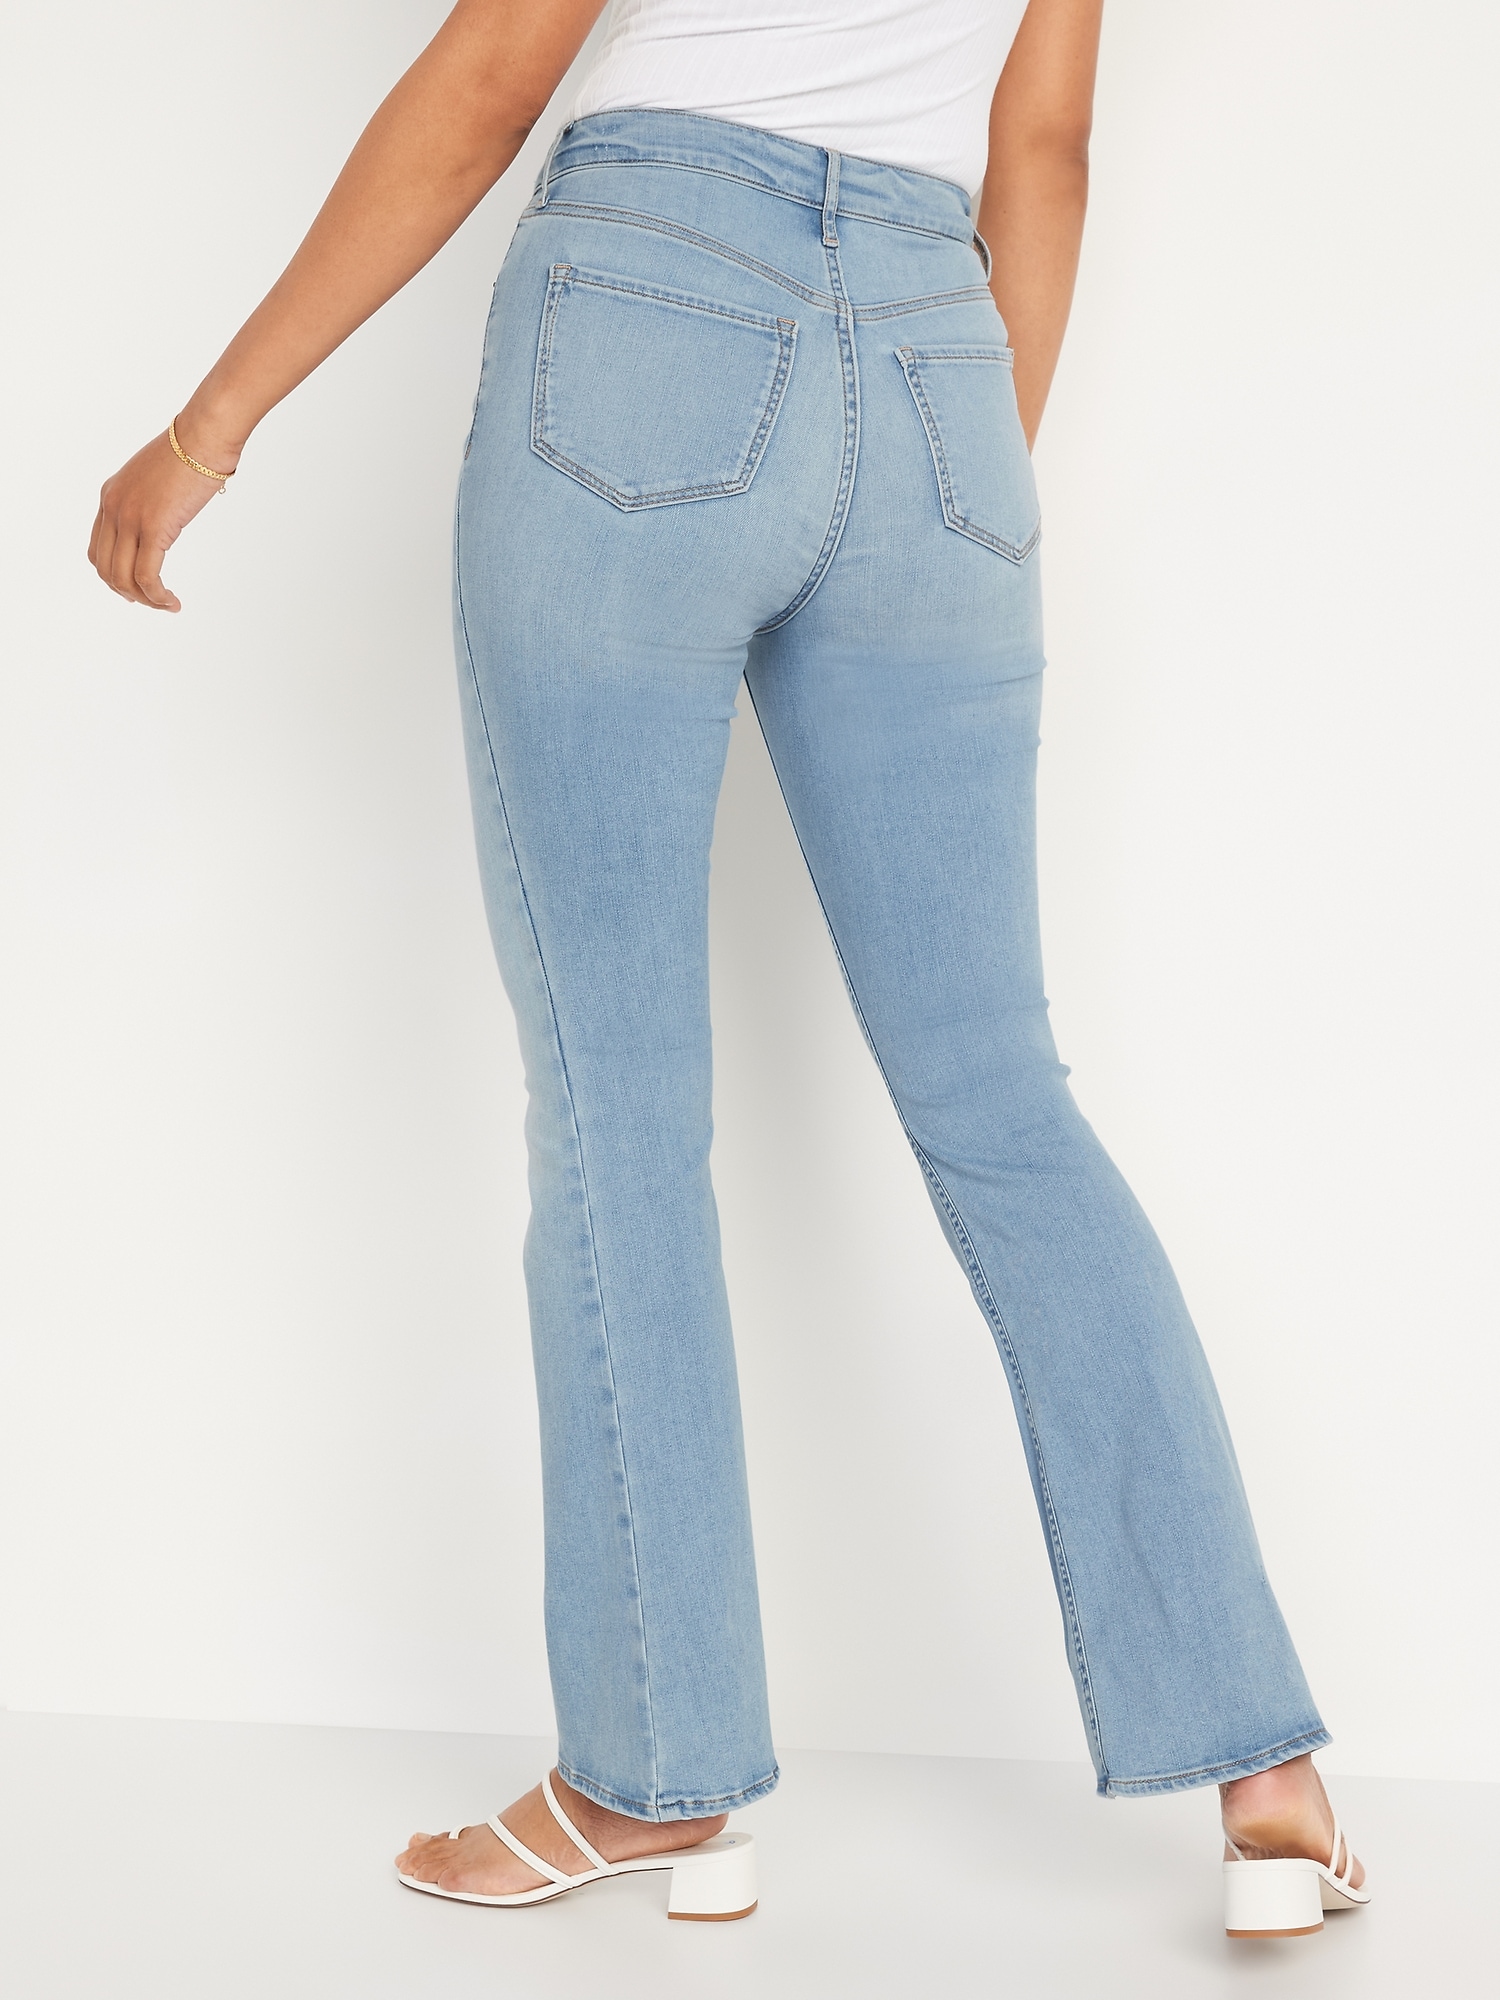 FitsYou 3-Sizes-In-One Extra Navy High-Waisted | for Women Old Flare Jeans